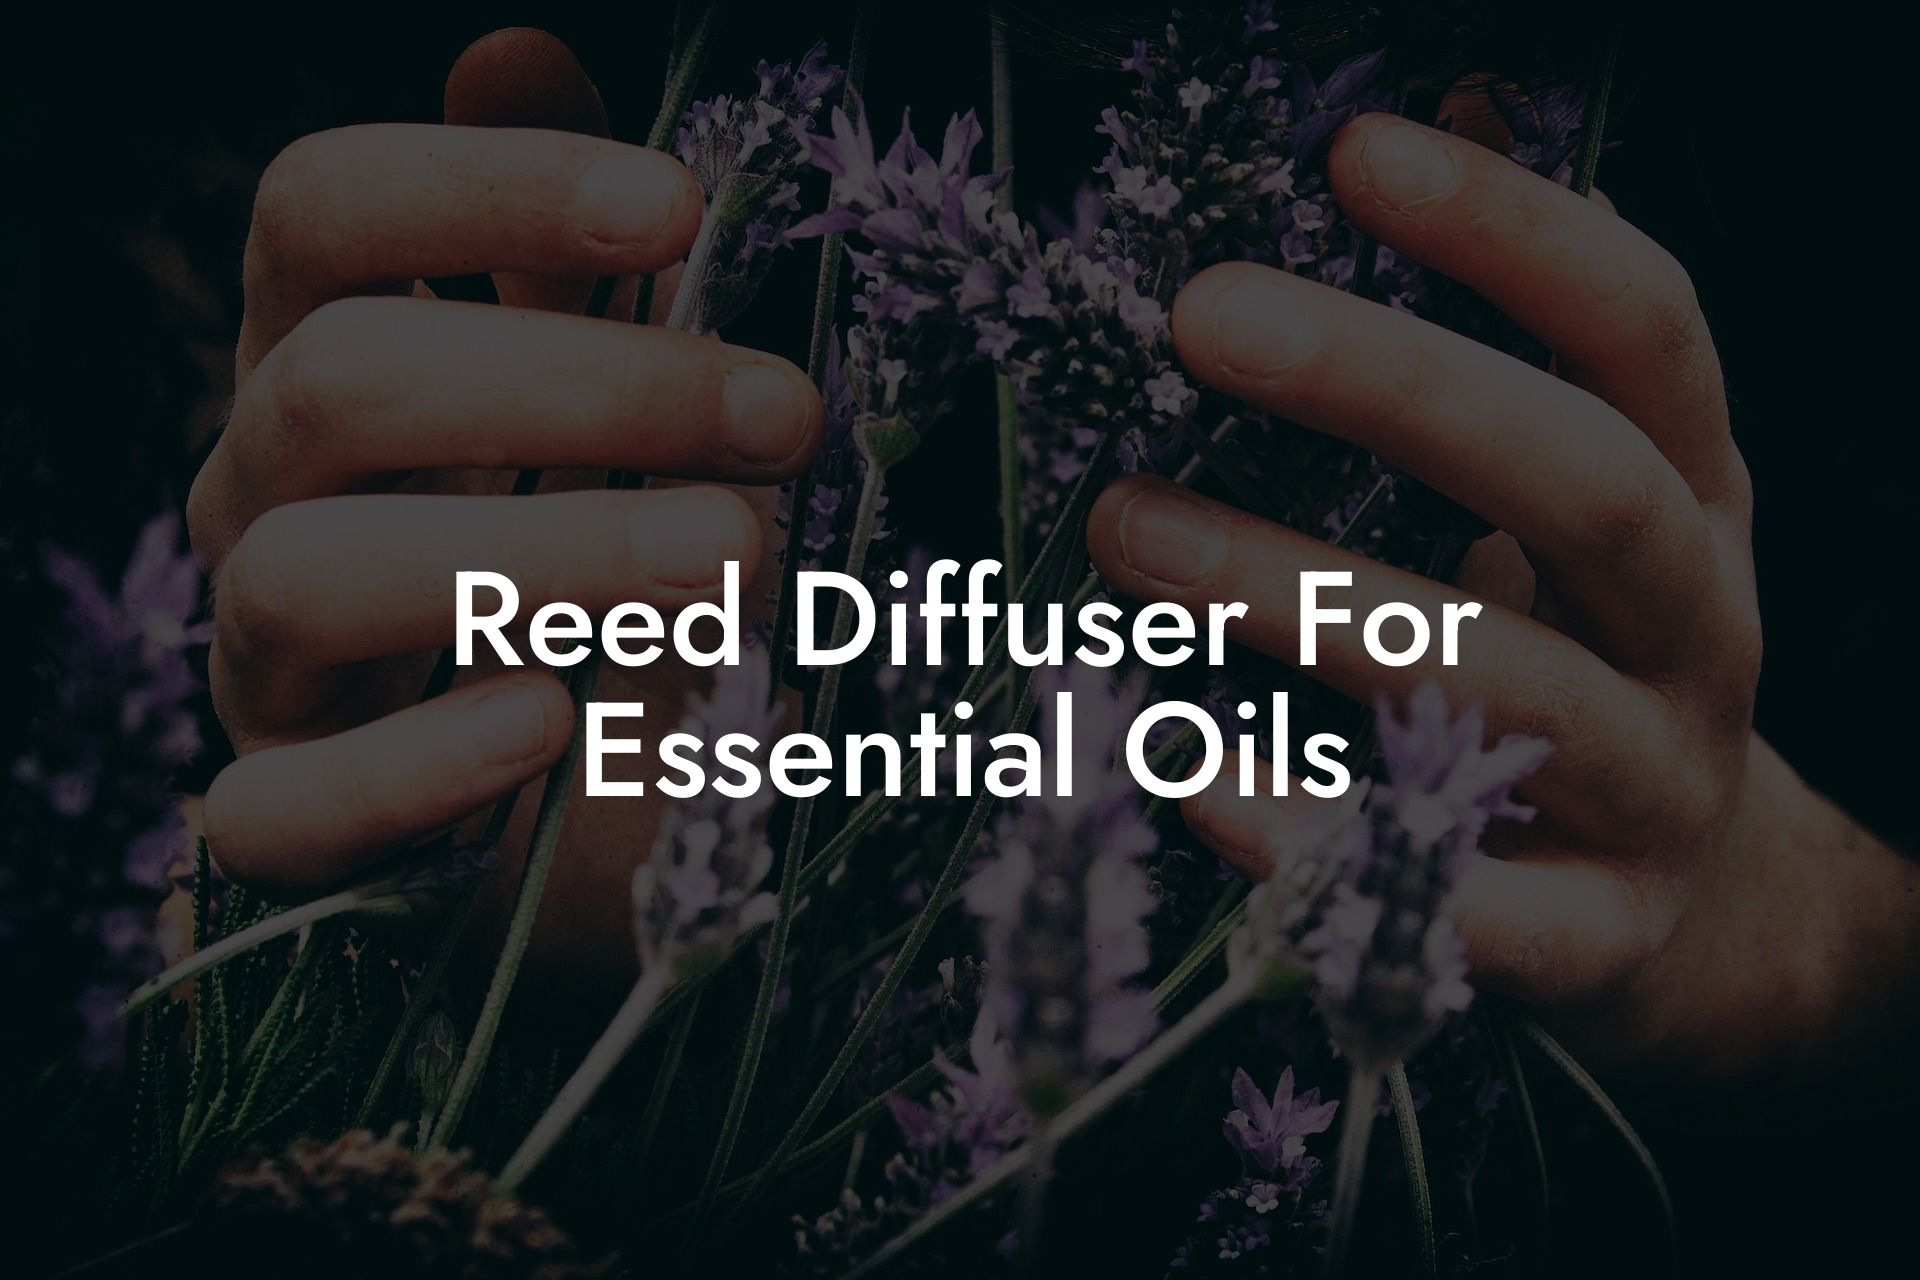 Reed Diffuser For Essential Oils